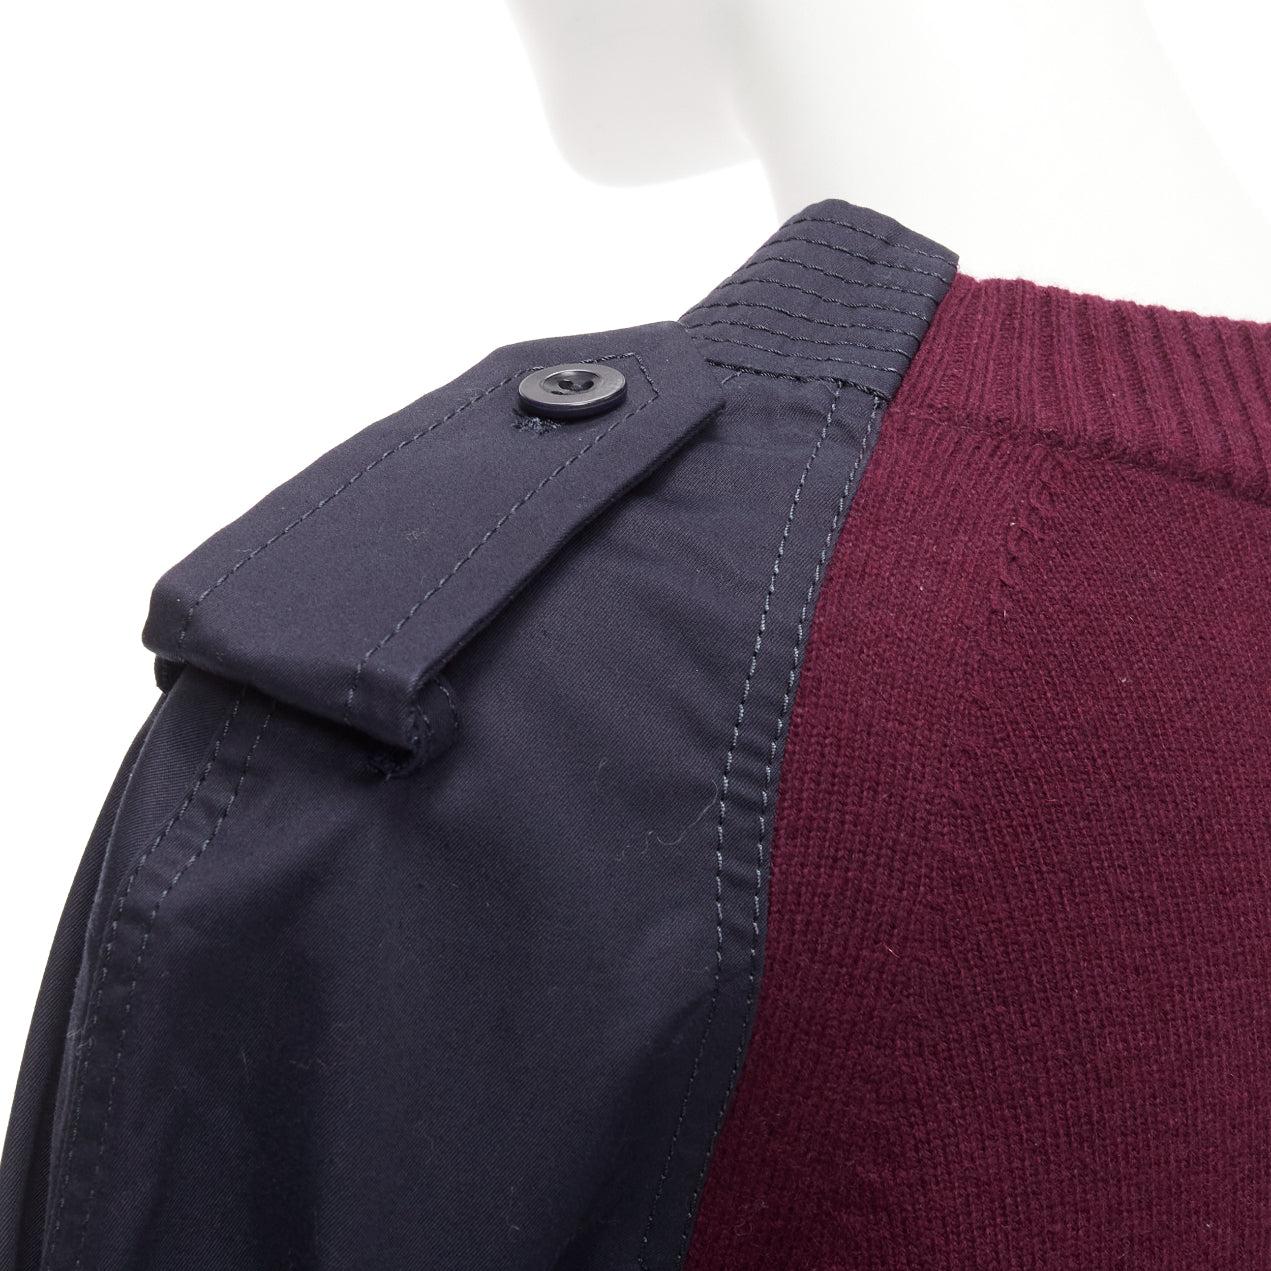 SACAI burgundy knit navy woven contrast bell sleeve reconstructed sweater
Reference: NILI/A00022
Brand: Sacai
Designer: Chitose Abe
Material: Feels like wool
Color: Red, Navy
Pattern: Solid
Closure: Pullover
Extra Details: Belted design at upper